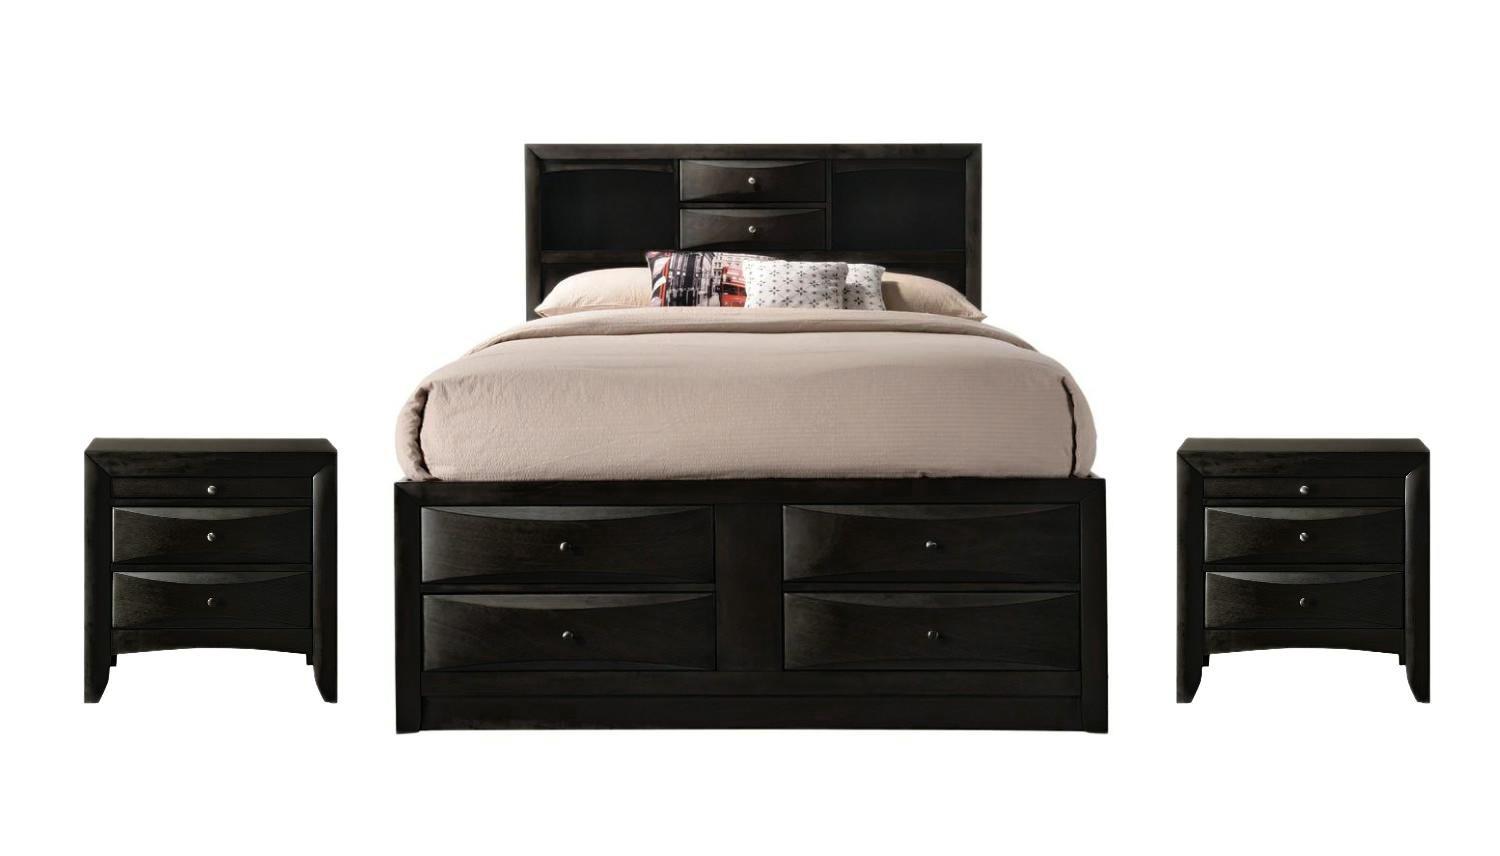 Contemporary, Transitional Storage Bedroom Set Emily B4285-Q-Bed-3pcs in Black 